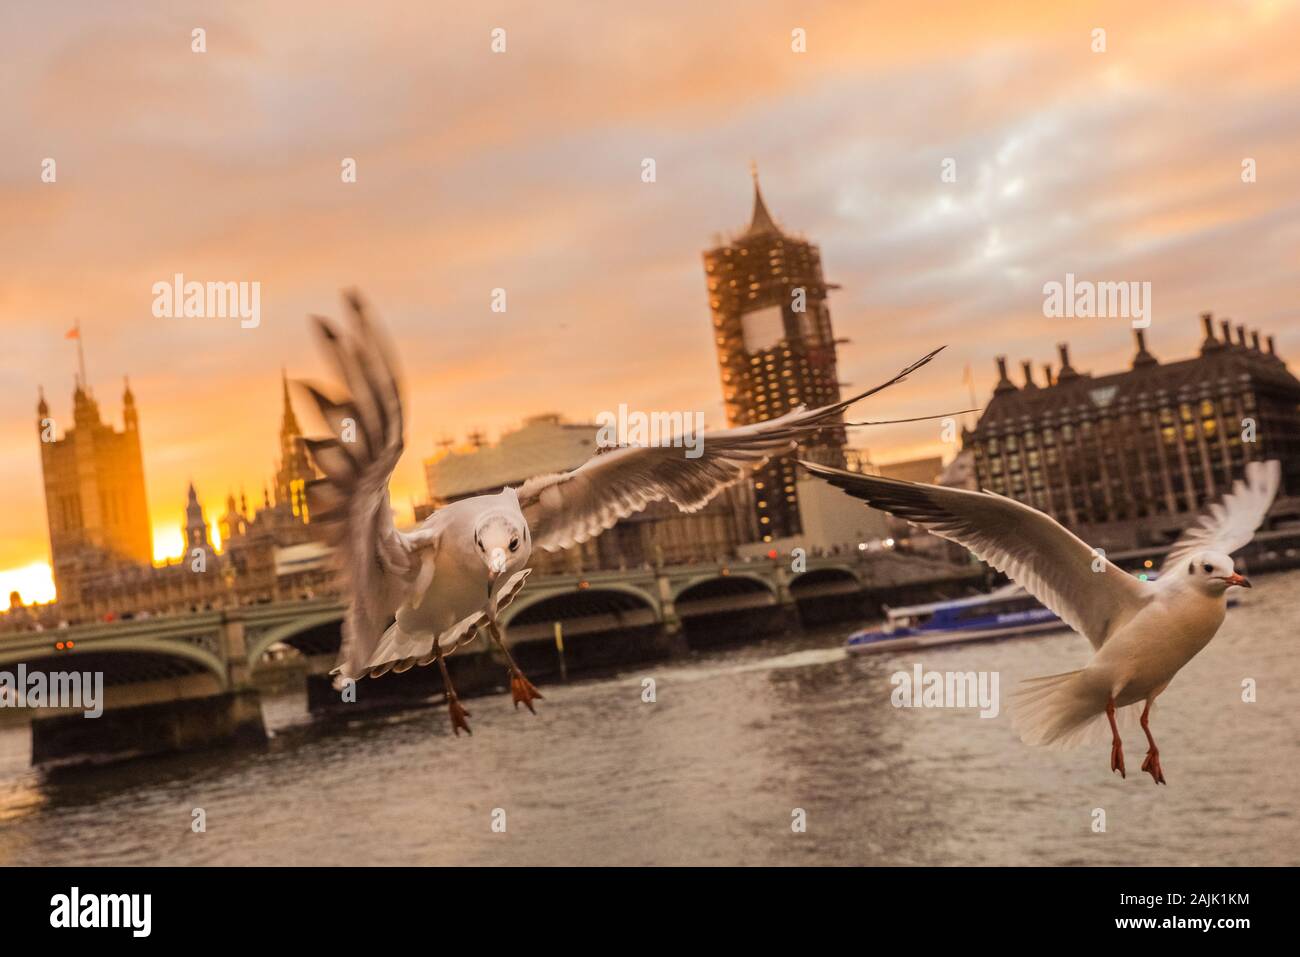 Westminster, London, 4th Jan 2020. A flock of cheeky seagulls are photo bombing a photographer's shots of the Westminster sunset as they flutter around and hover in shot, just across from the Houses of Parliament on the River Thames. Stock Photo